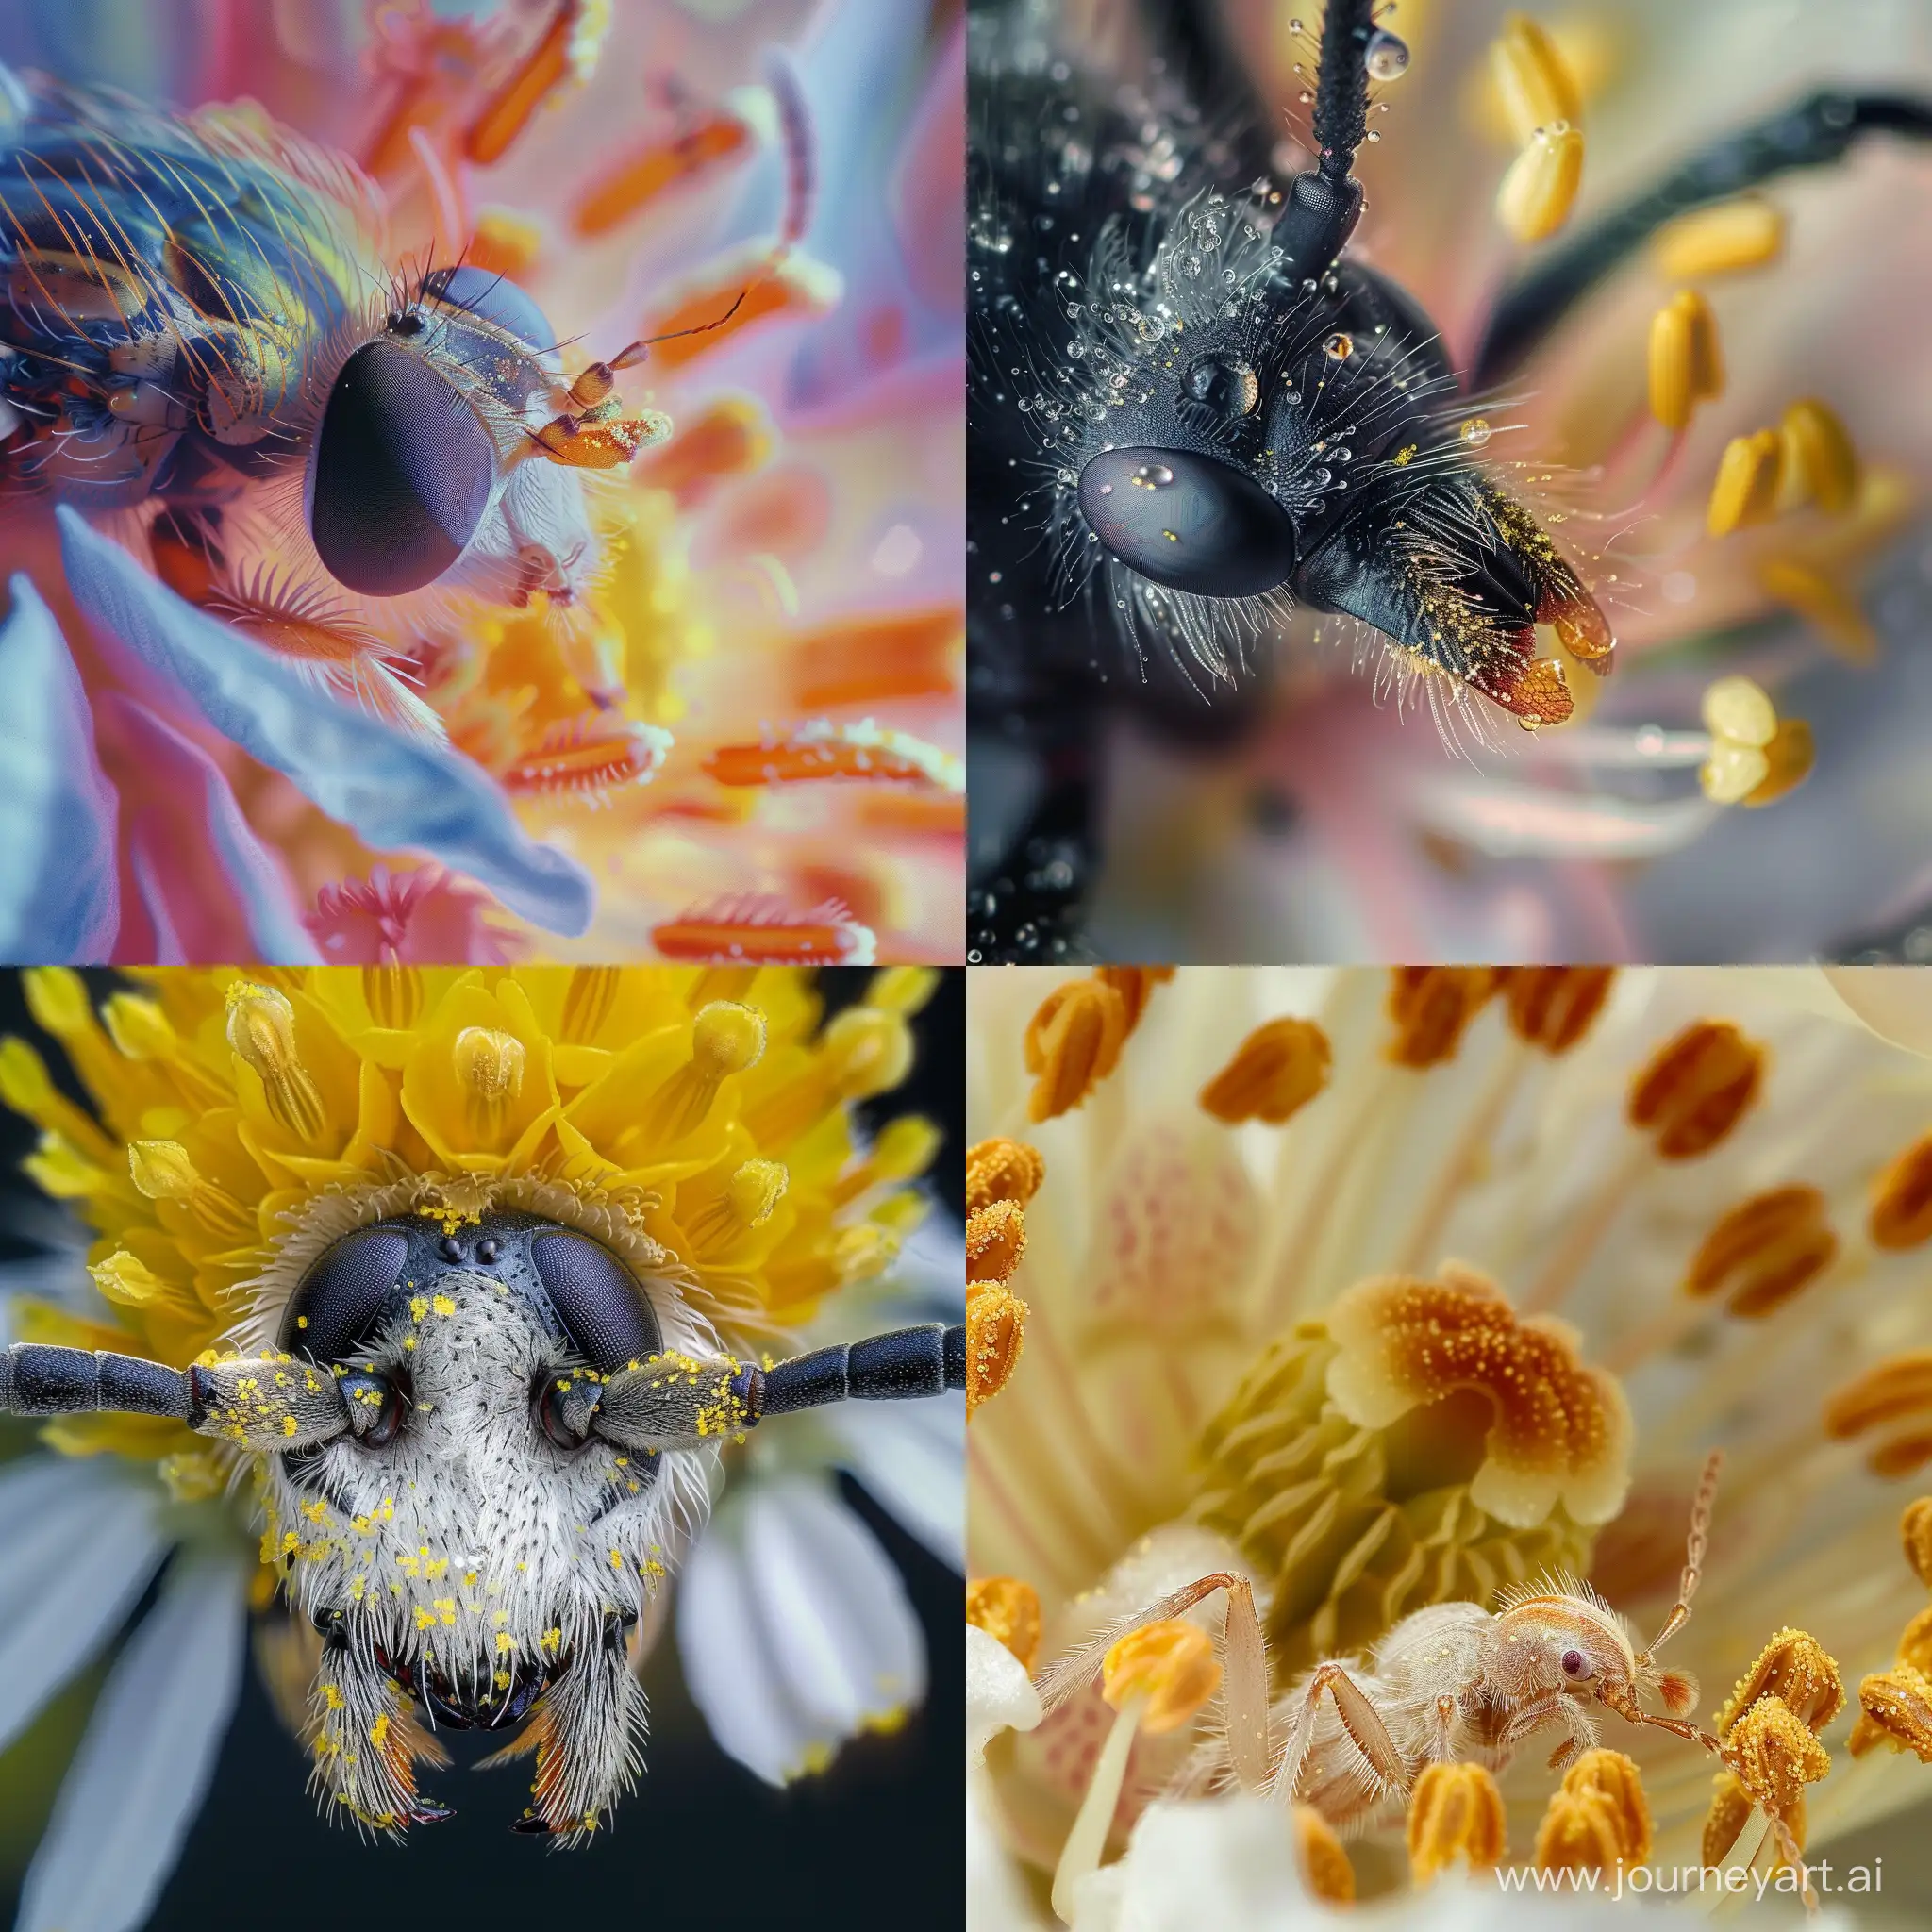 Extreme close-ups of flowers, insects, or everyday objects.